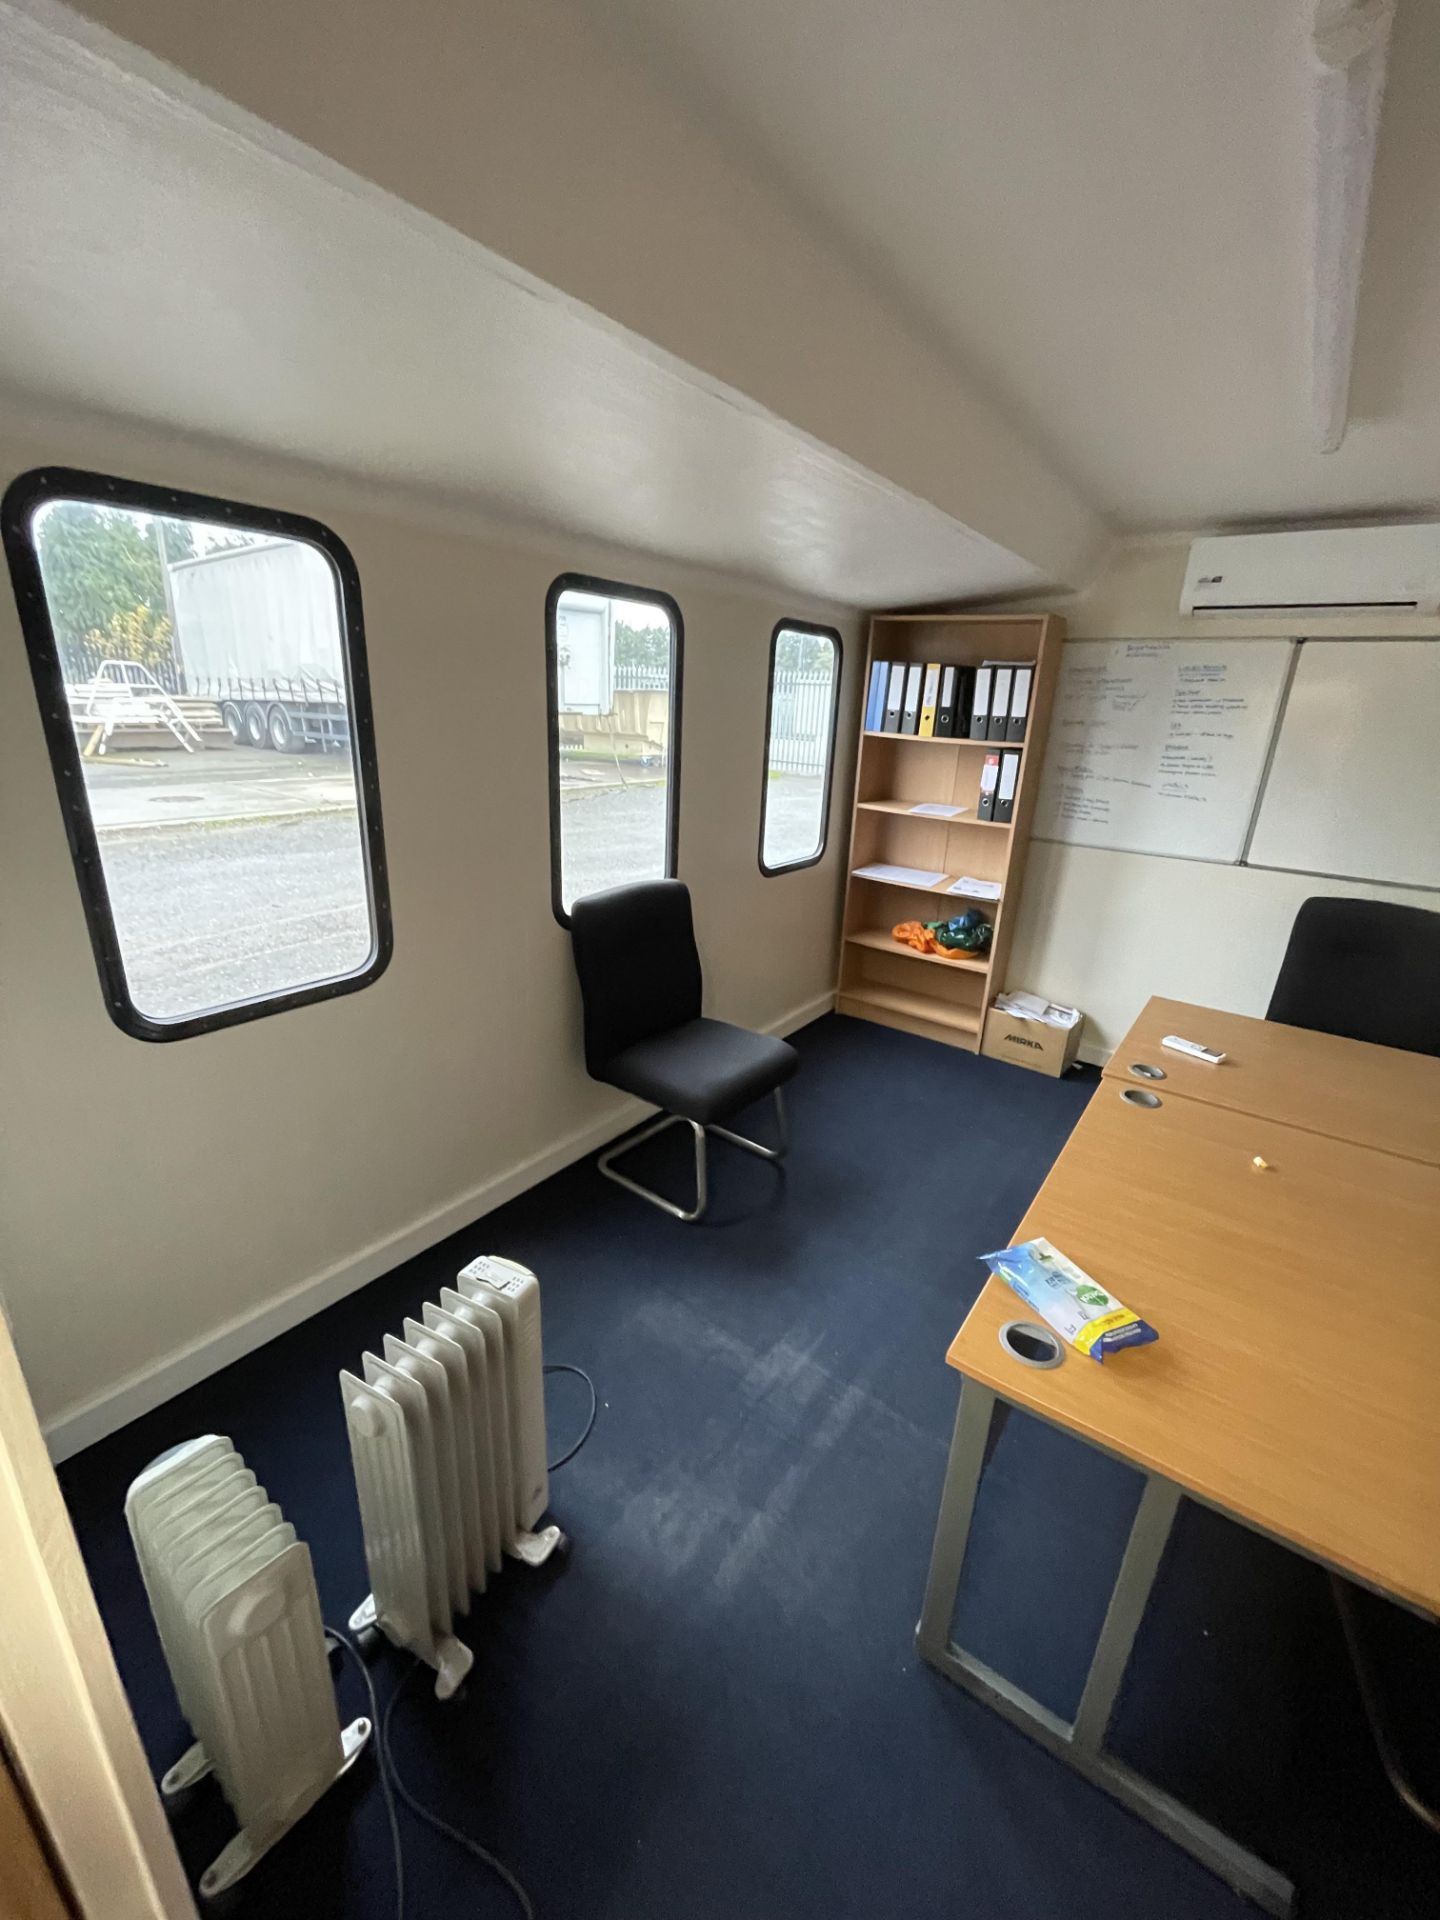 Marine Pod Cabin Office, Internal Measurements: 10.5x3.4x2.4m, Wired and Fitted with 2x Chigo MFR- - Image 12 of 13